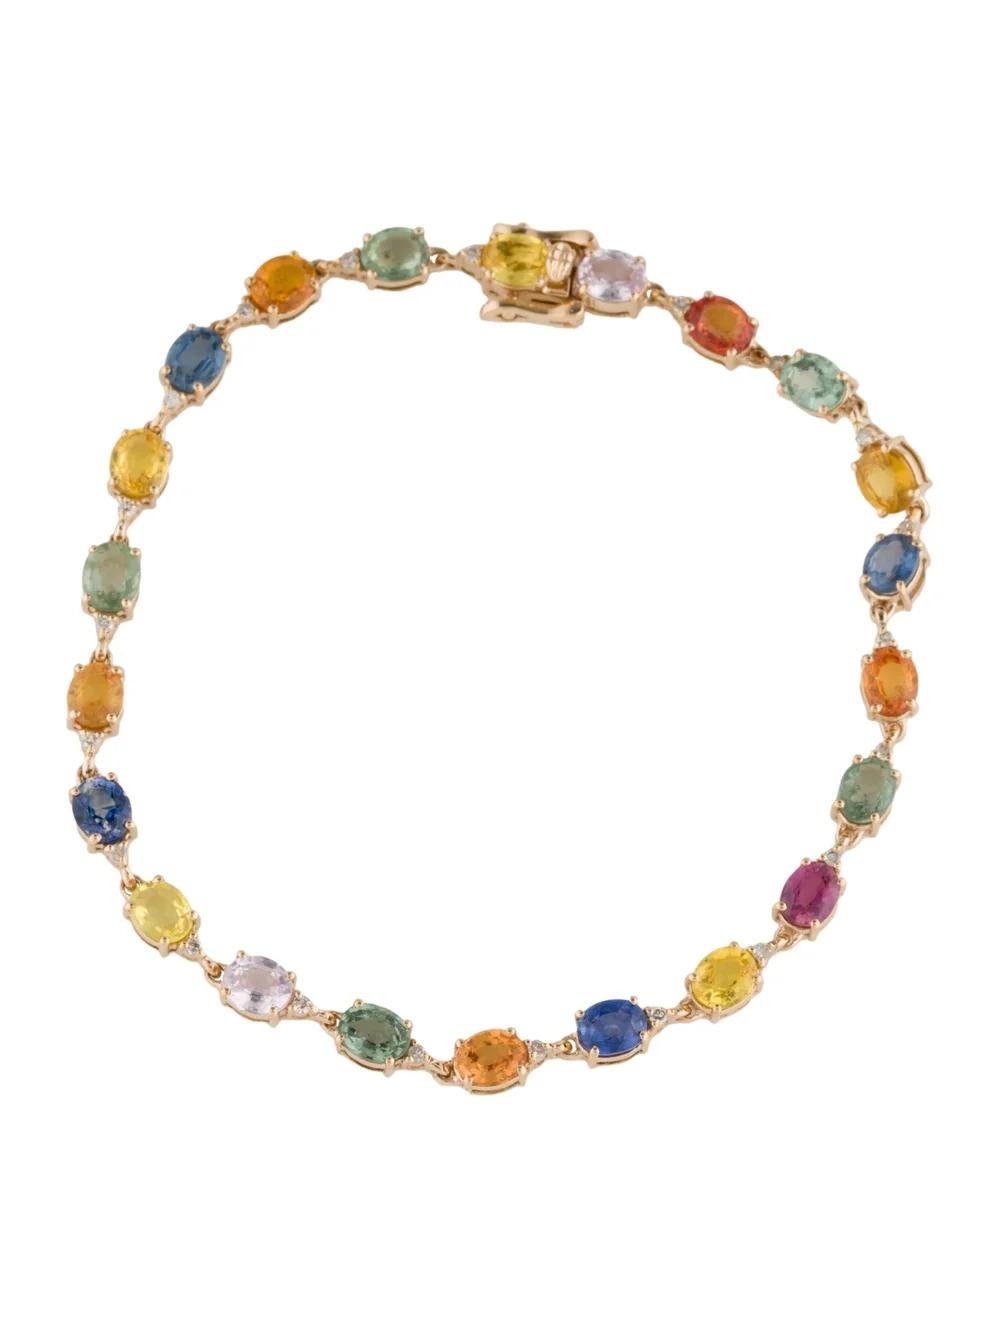 Experience elegance and sophistication with this exquisite 14K Yellow Gold Bracelet adorned with stunning gemstones. Crafted to perfection, this bracelet features a captivating 9.91 Carat Oval Modified Brilliant Sapphire as its centerpiece, exuding